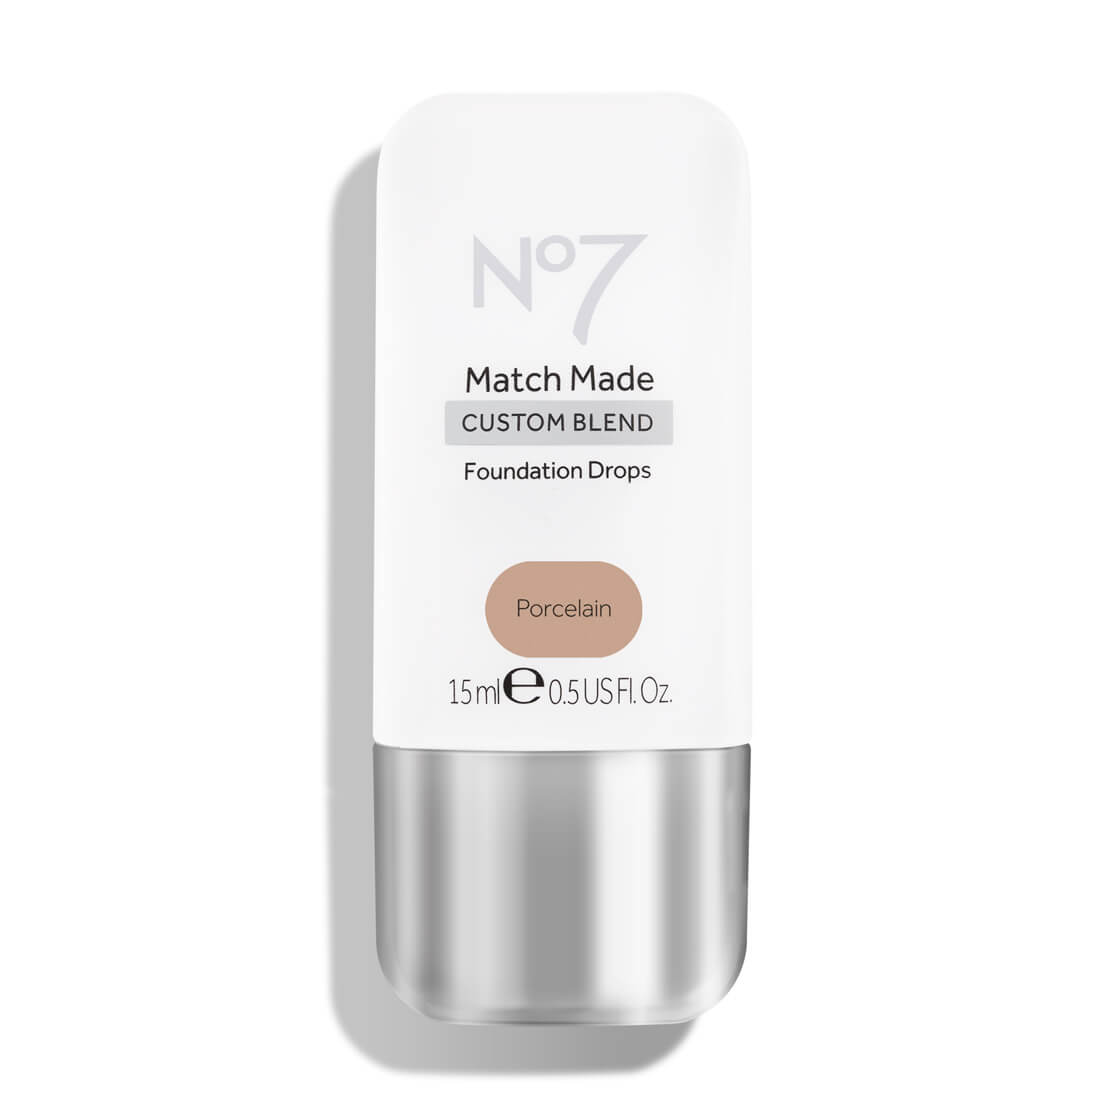 Match Made Foundation Drops (Various Shades) - 1 Porcelain